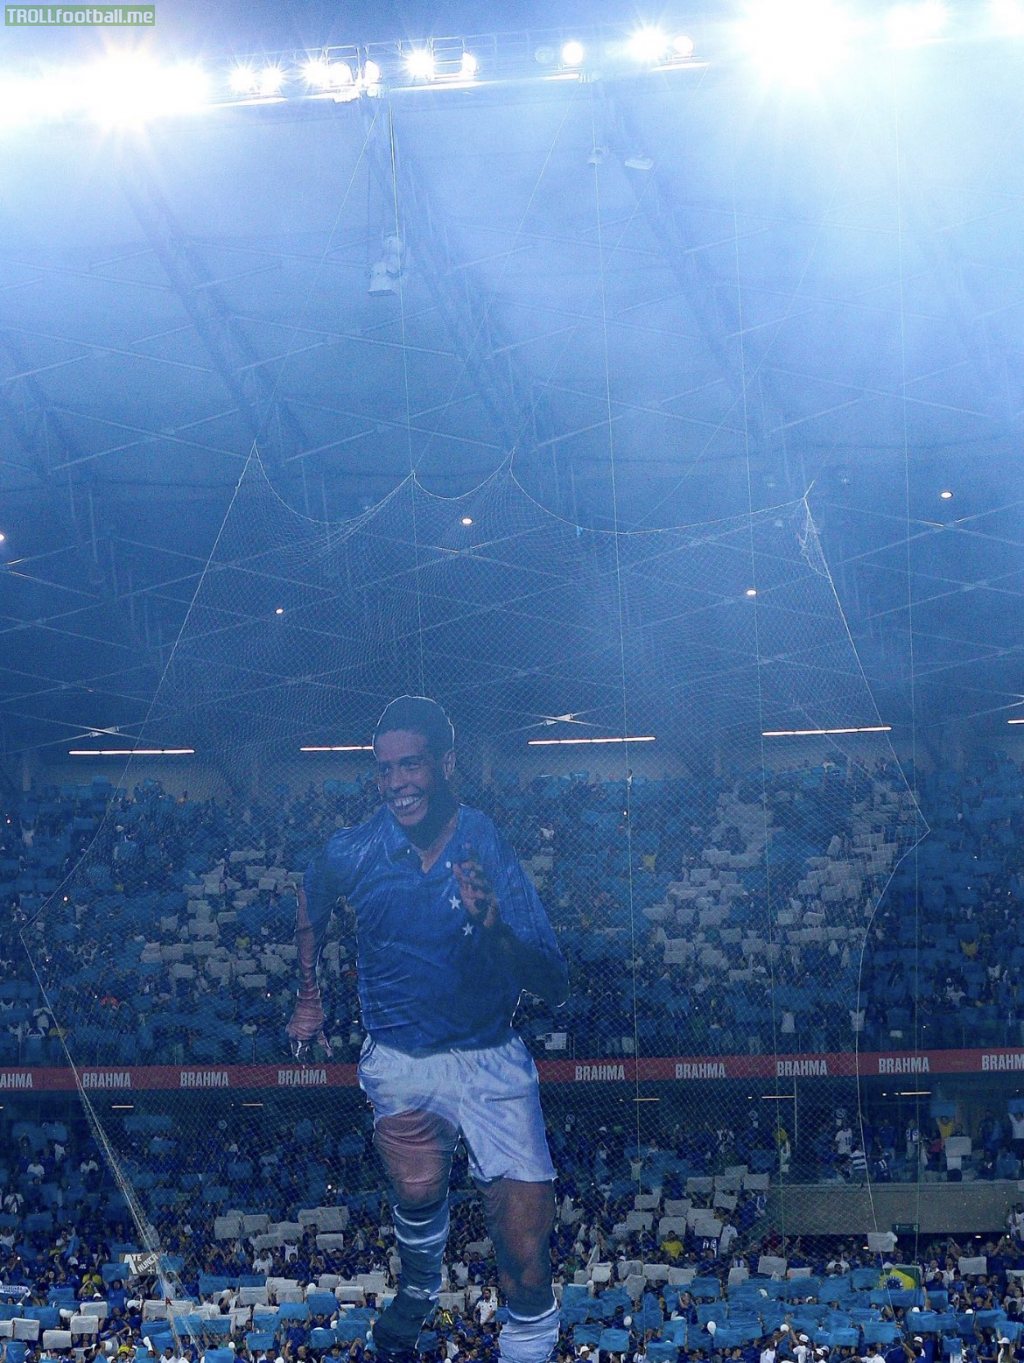 In the game that sealed Cruzeiro's promotion to Brasil's Serie A after 3 years, the fans paid homage to their greatest youth player and now owner Ronaldo.